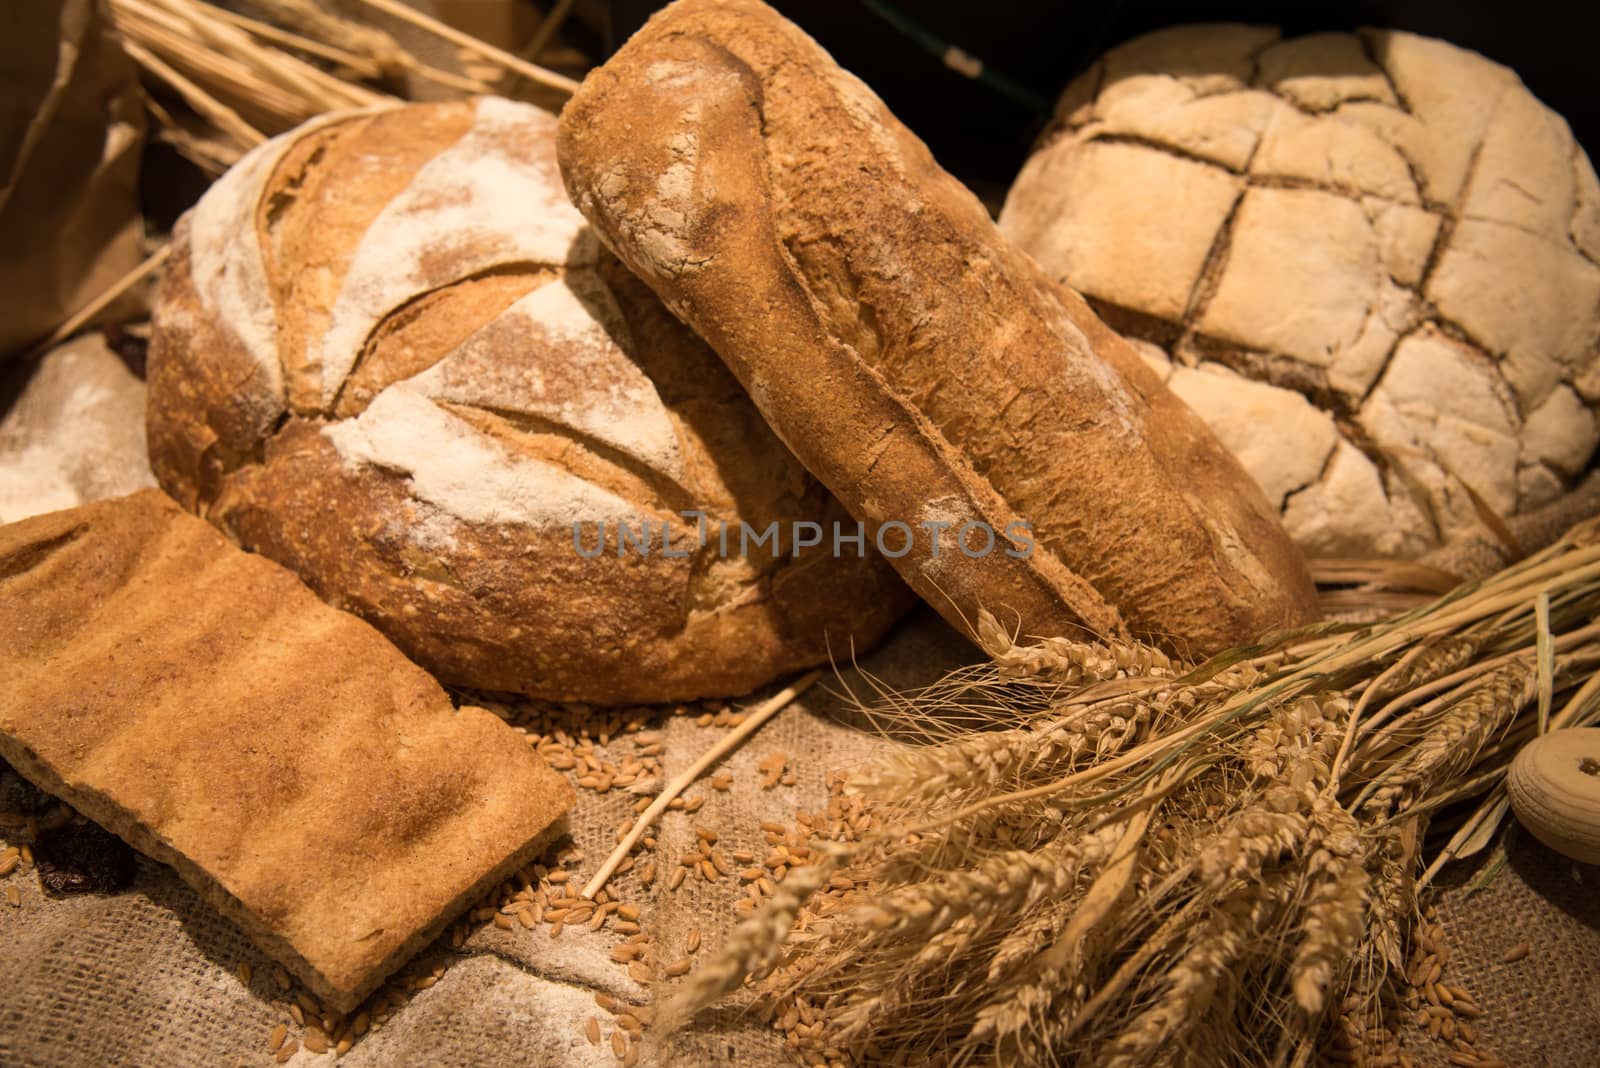 Many mixed breads . by LarisaP